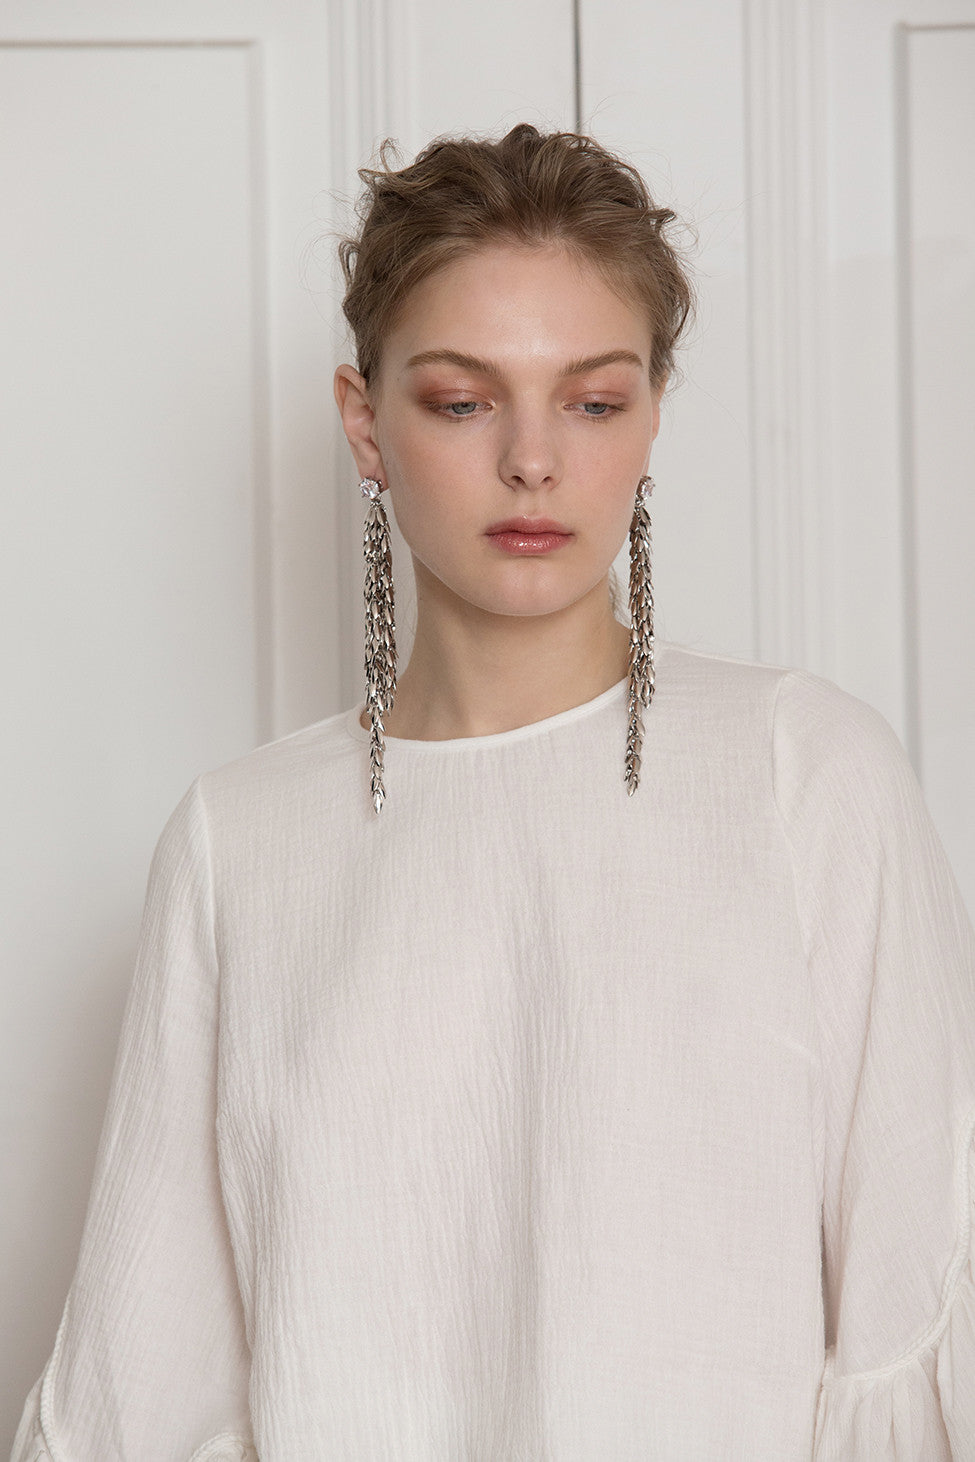 The Jupe, a pair of drop earrings in Sliver. Delicate chain design with cubic stud. Post back. Sold as a set.